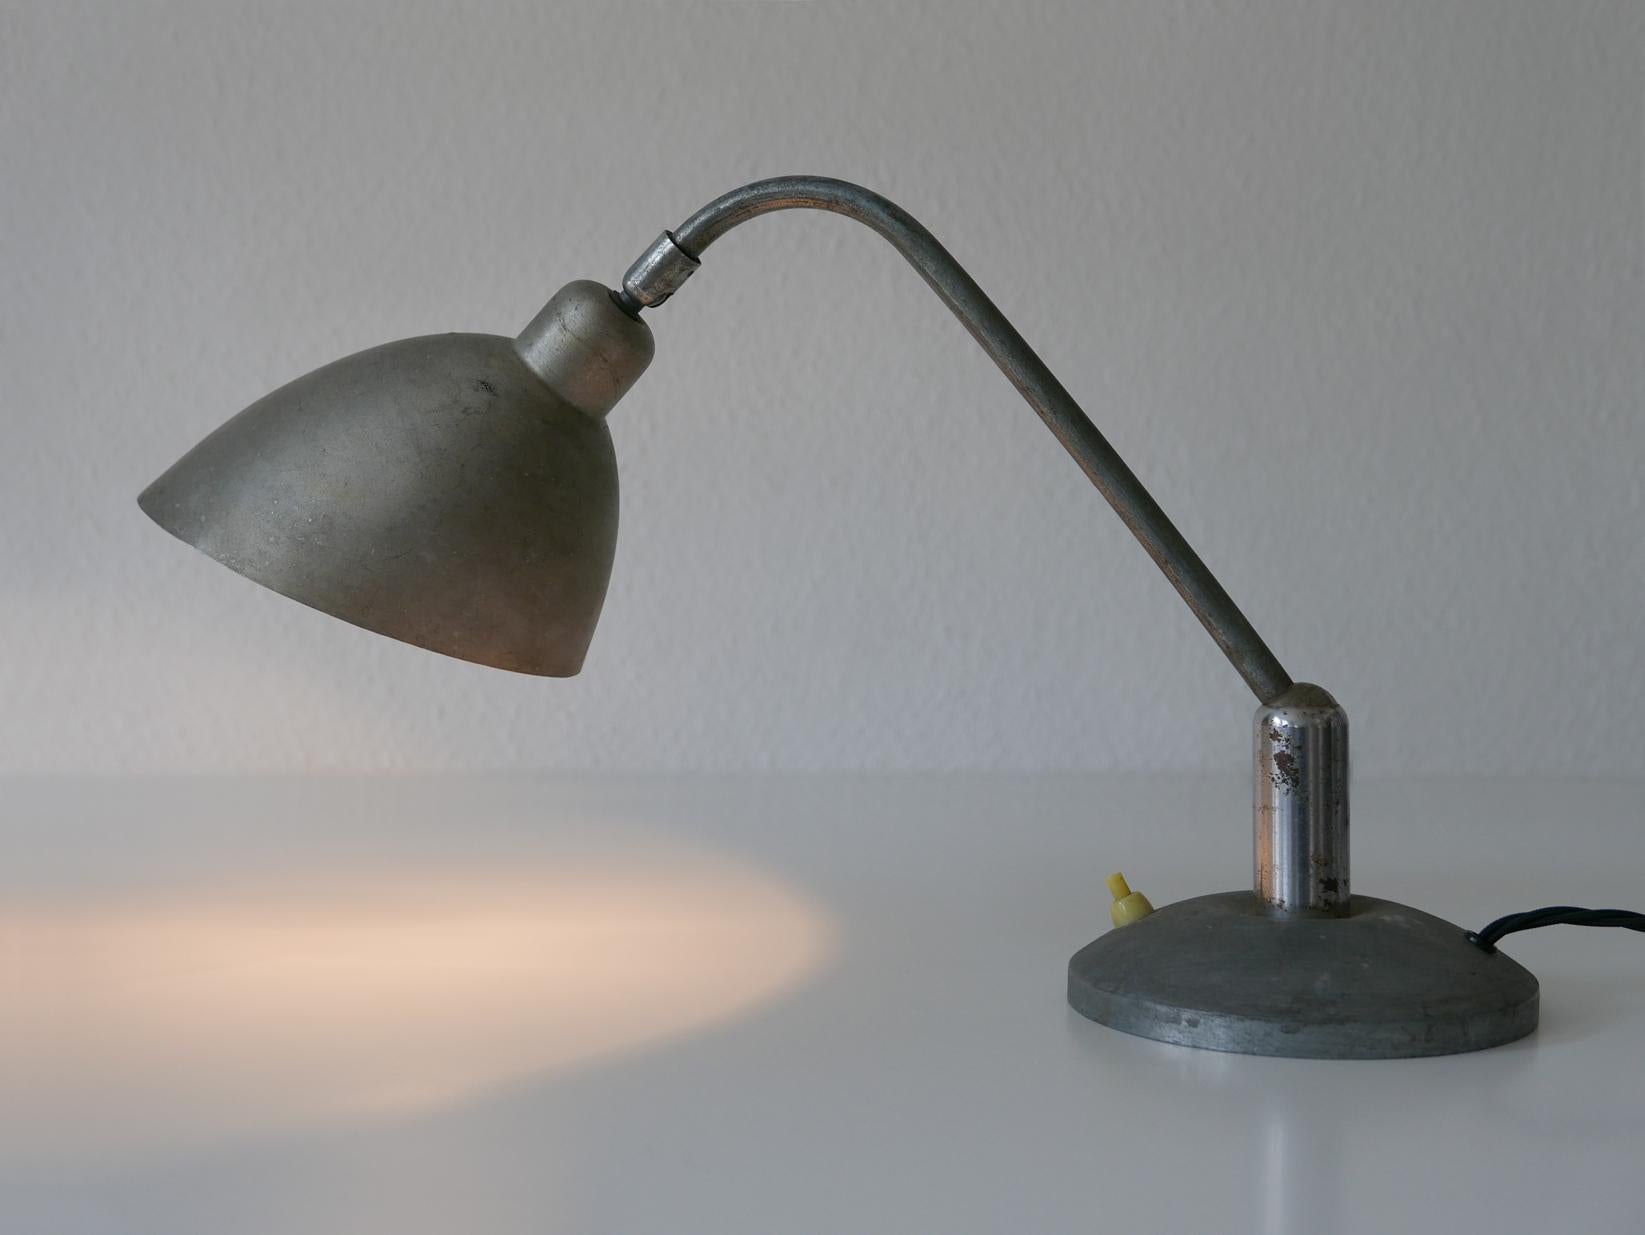 Rare Czech Functionalist or Bauhaus Table Lamp by Franta ‘Frantisek’ Anyz, 1920s For Sale 7